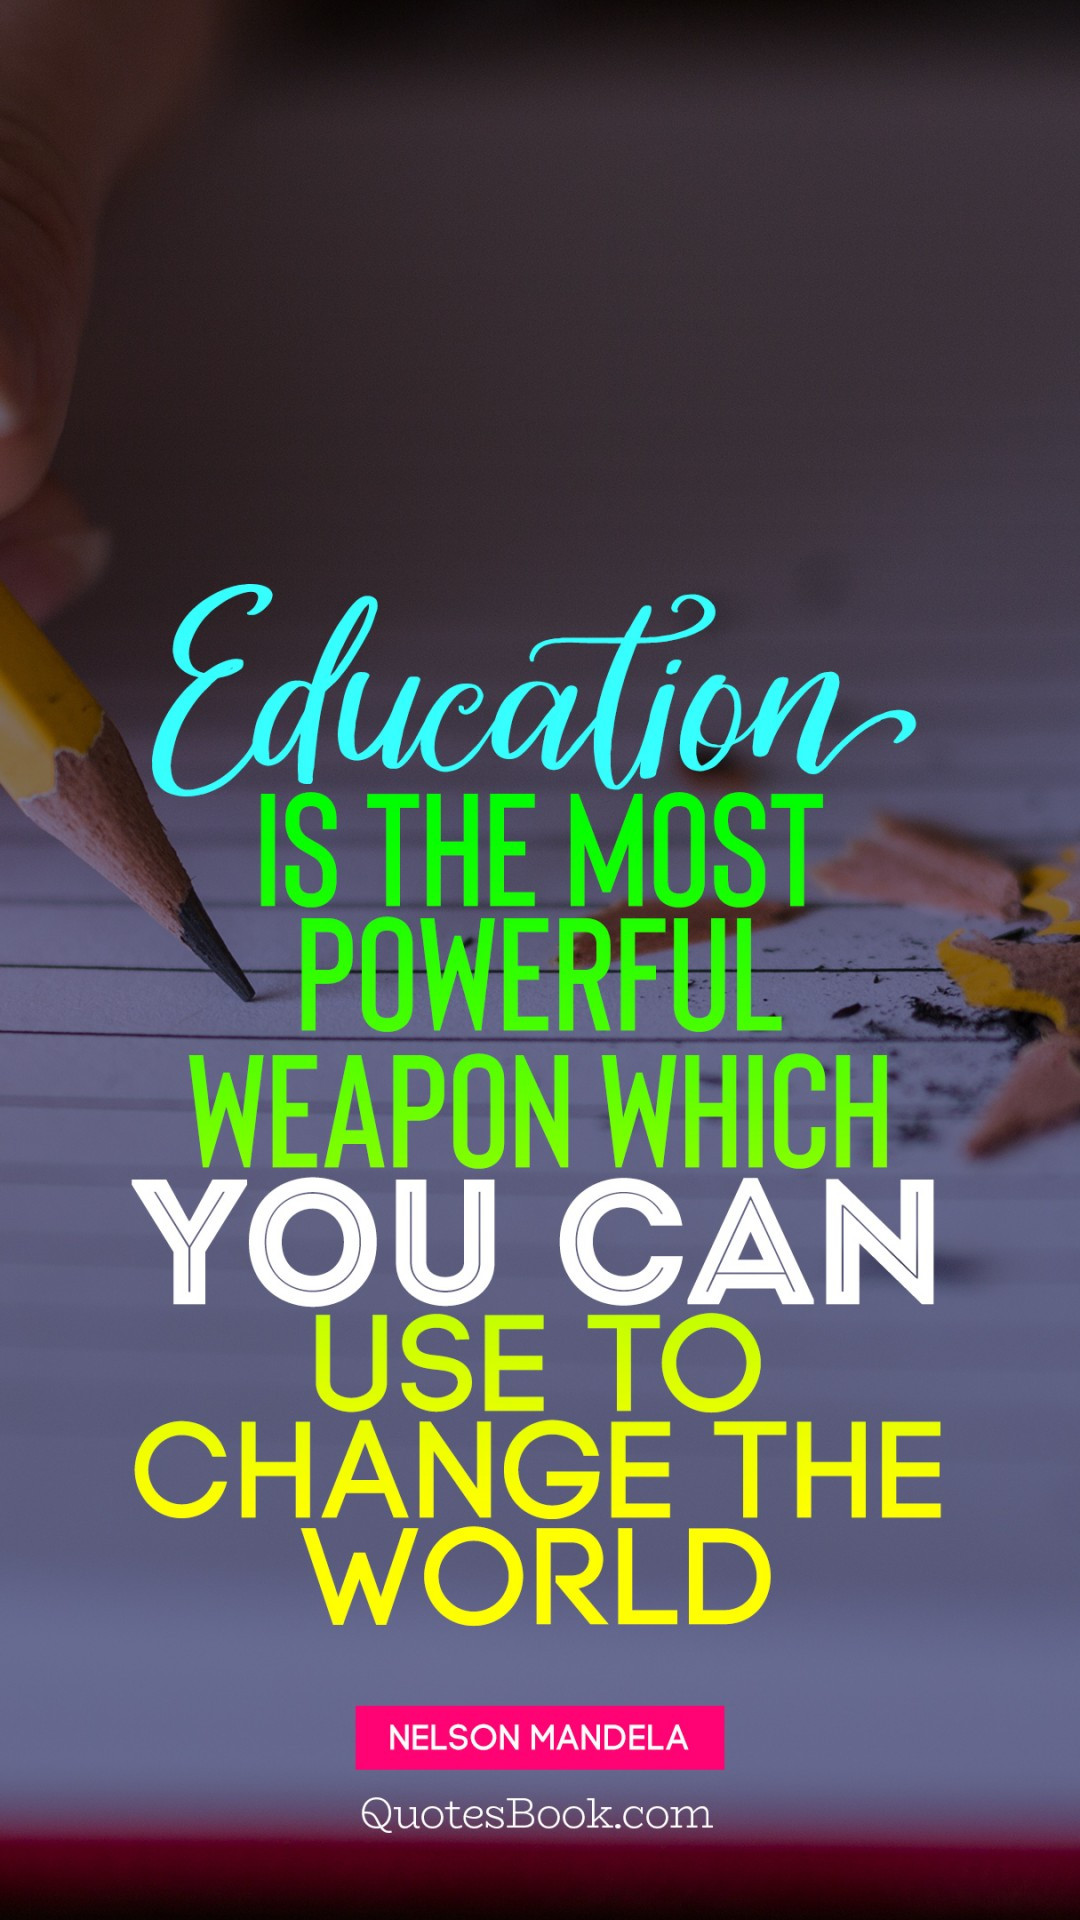 Powerful Quotes About Education
 Education is the most powerful weapon which you can use to